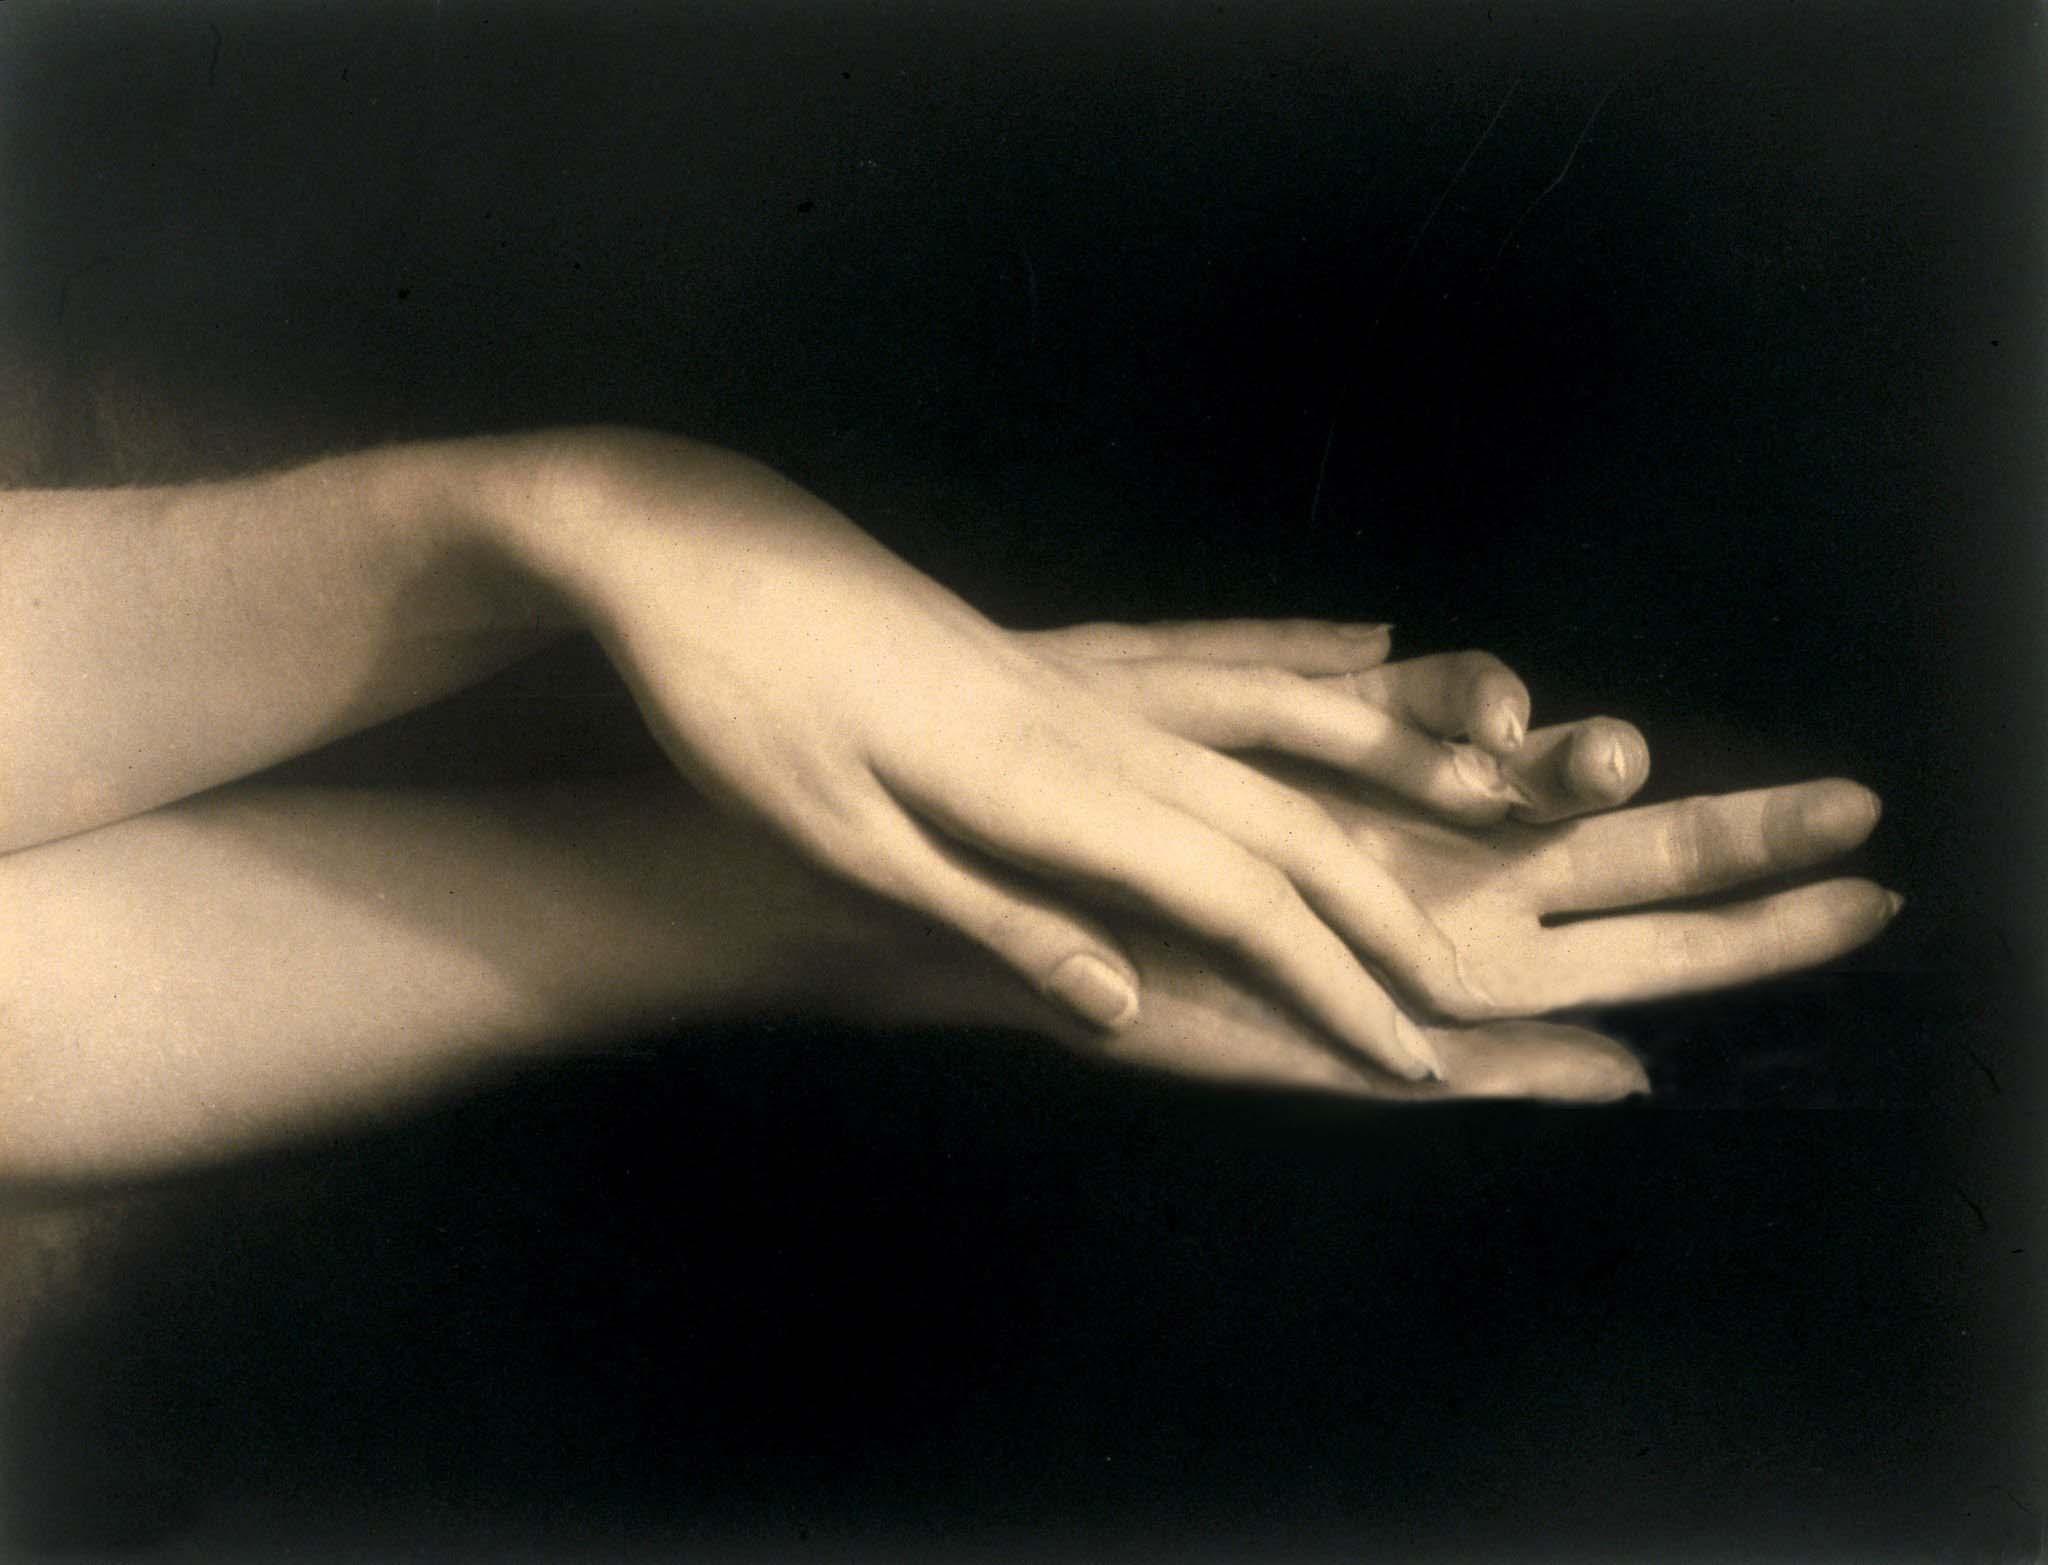 Atelier von Behr :: Hands, 1930s. The Royal Photographic Society Collection - V&A museum, London | src Getty Images